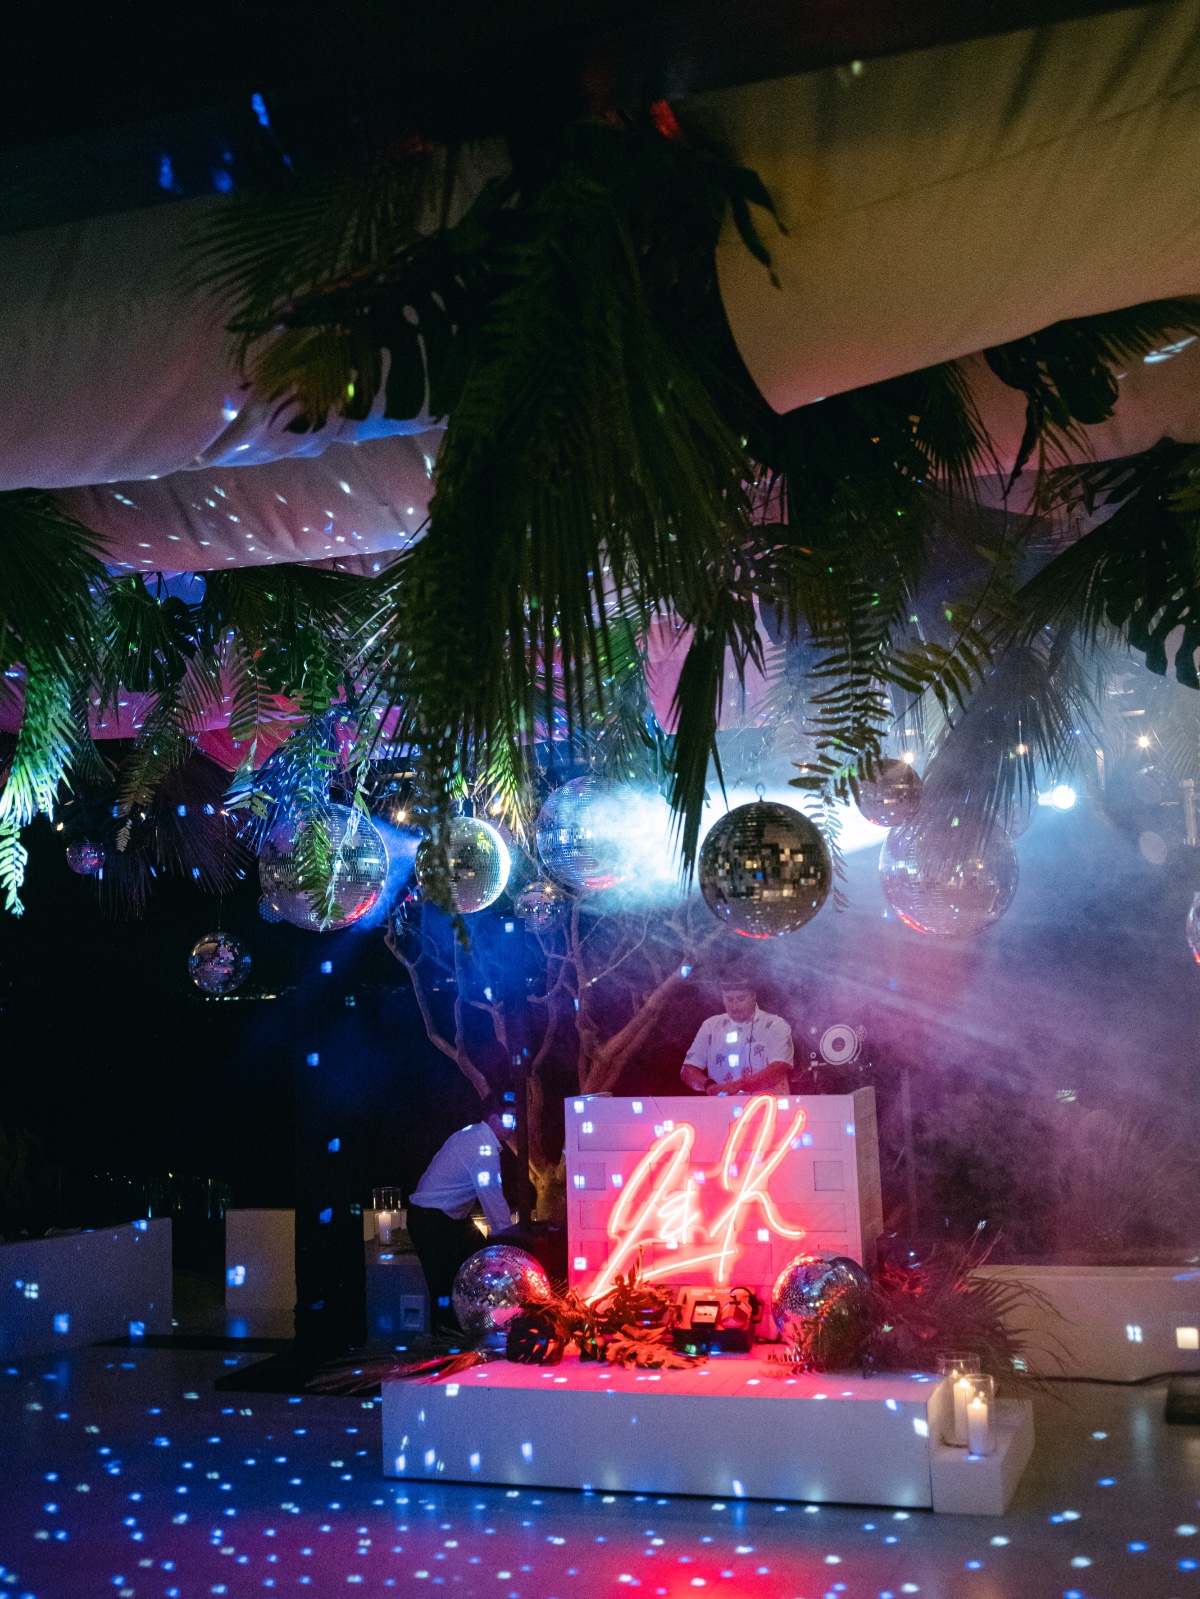 DJ behind booth with custom neon sign, tropical leaves, and disco balls